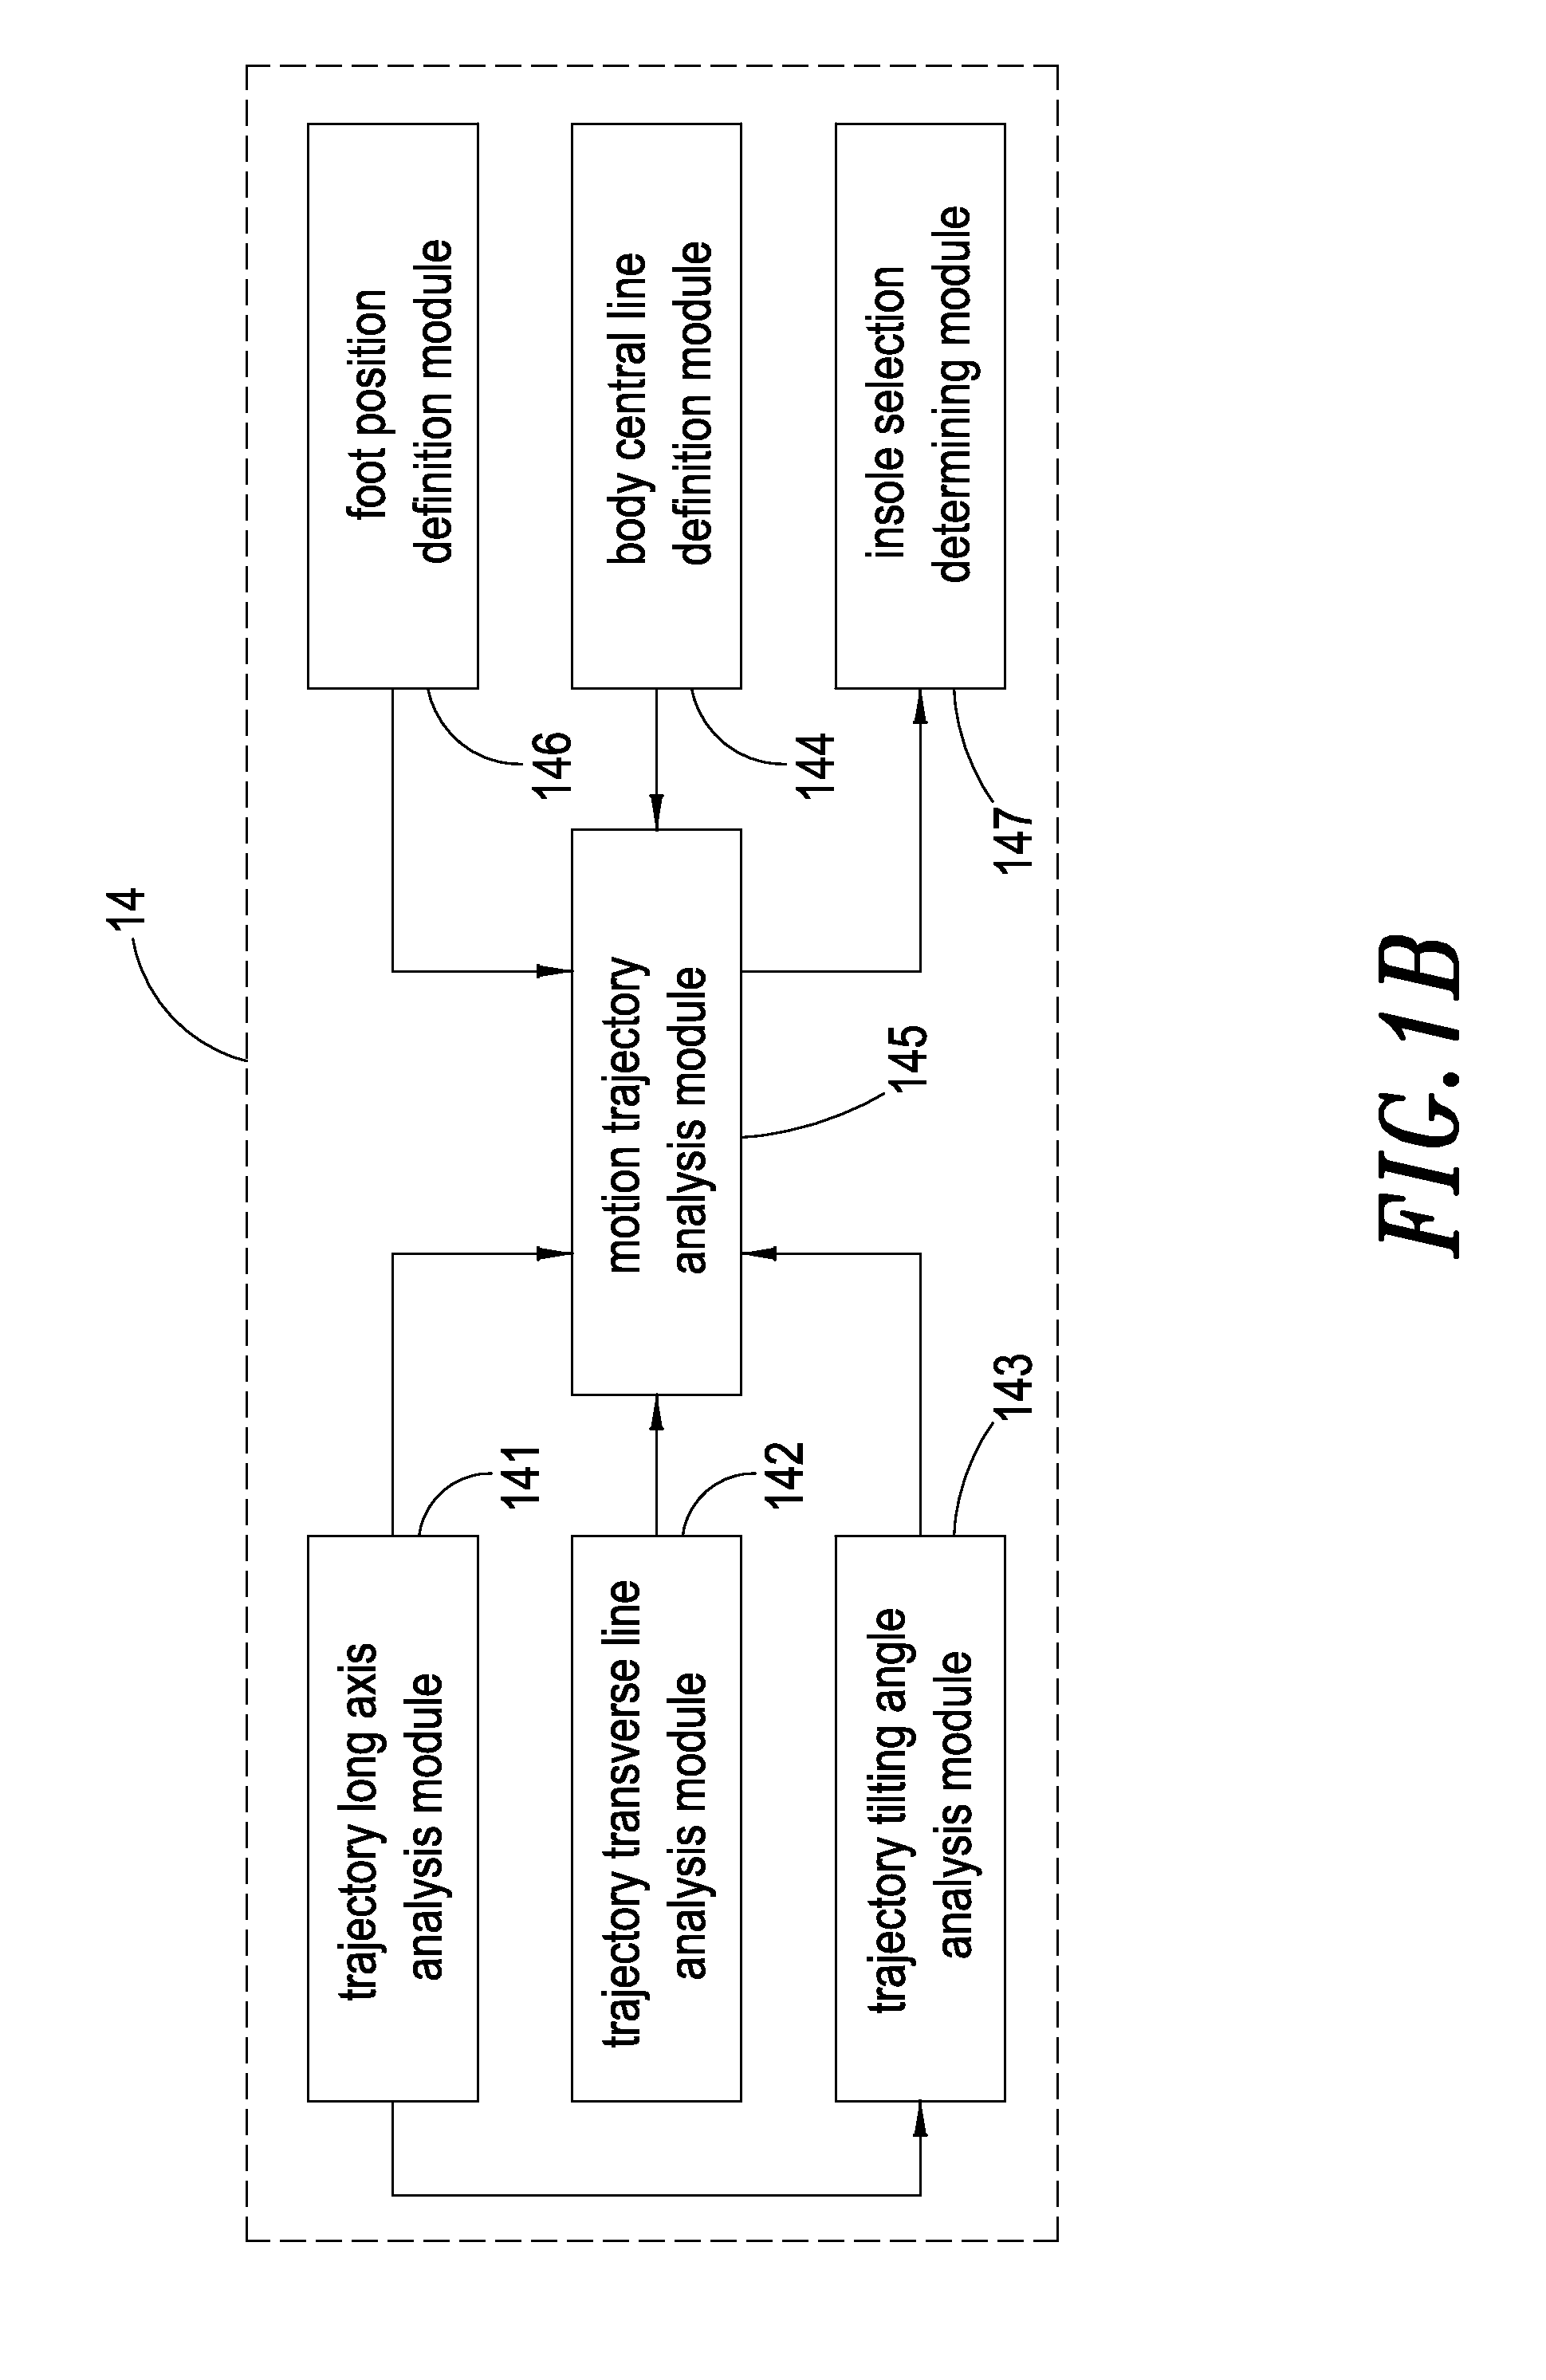 Measuring system and measuring method for analyzing knee joint motion trajectory during cycling